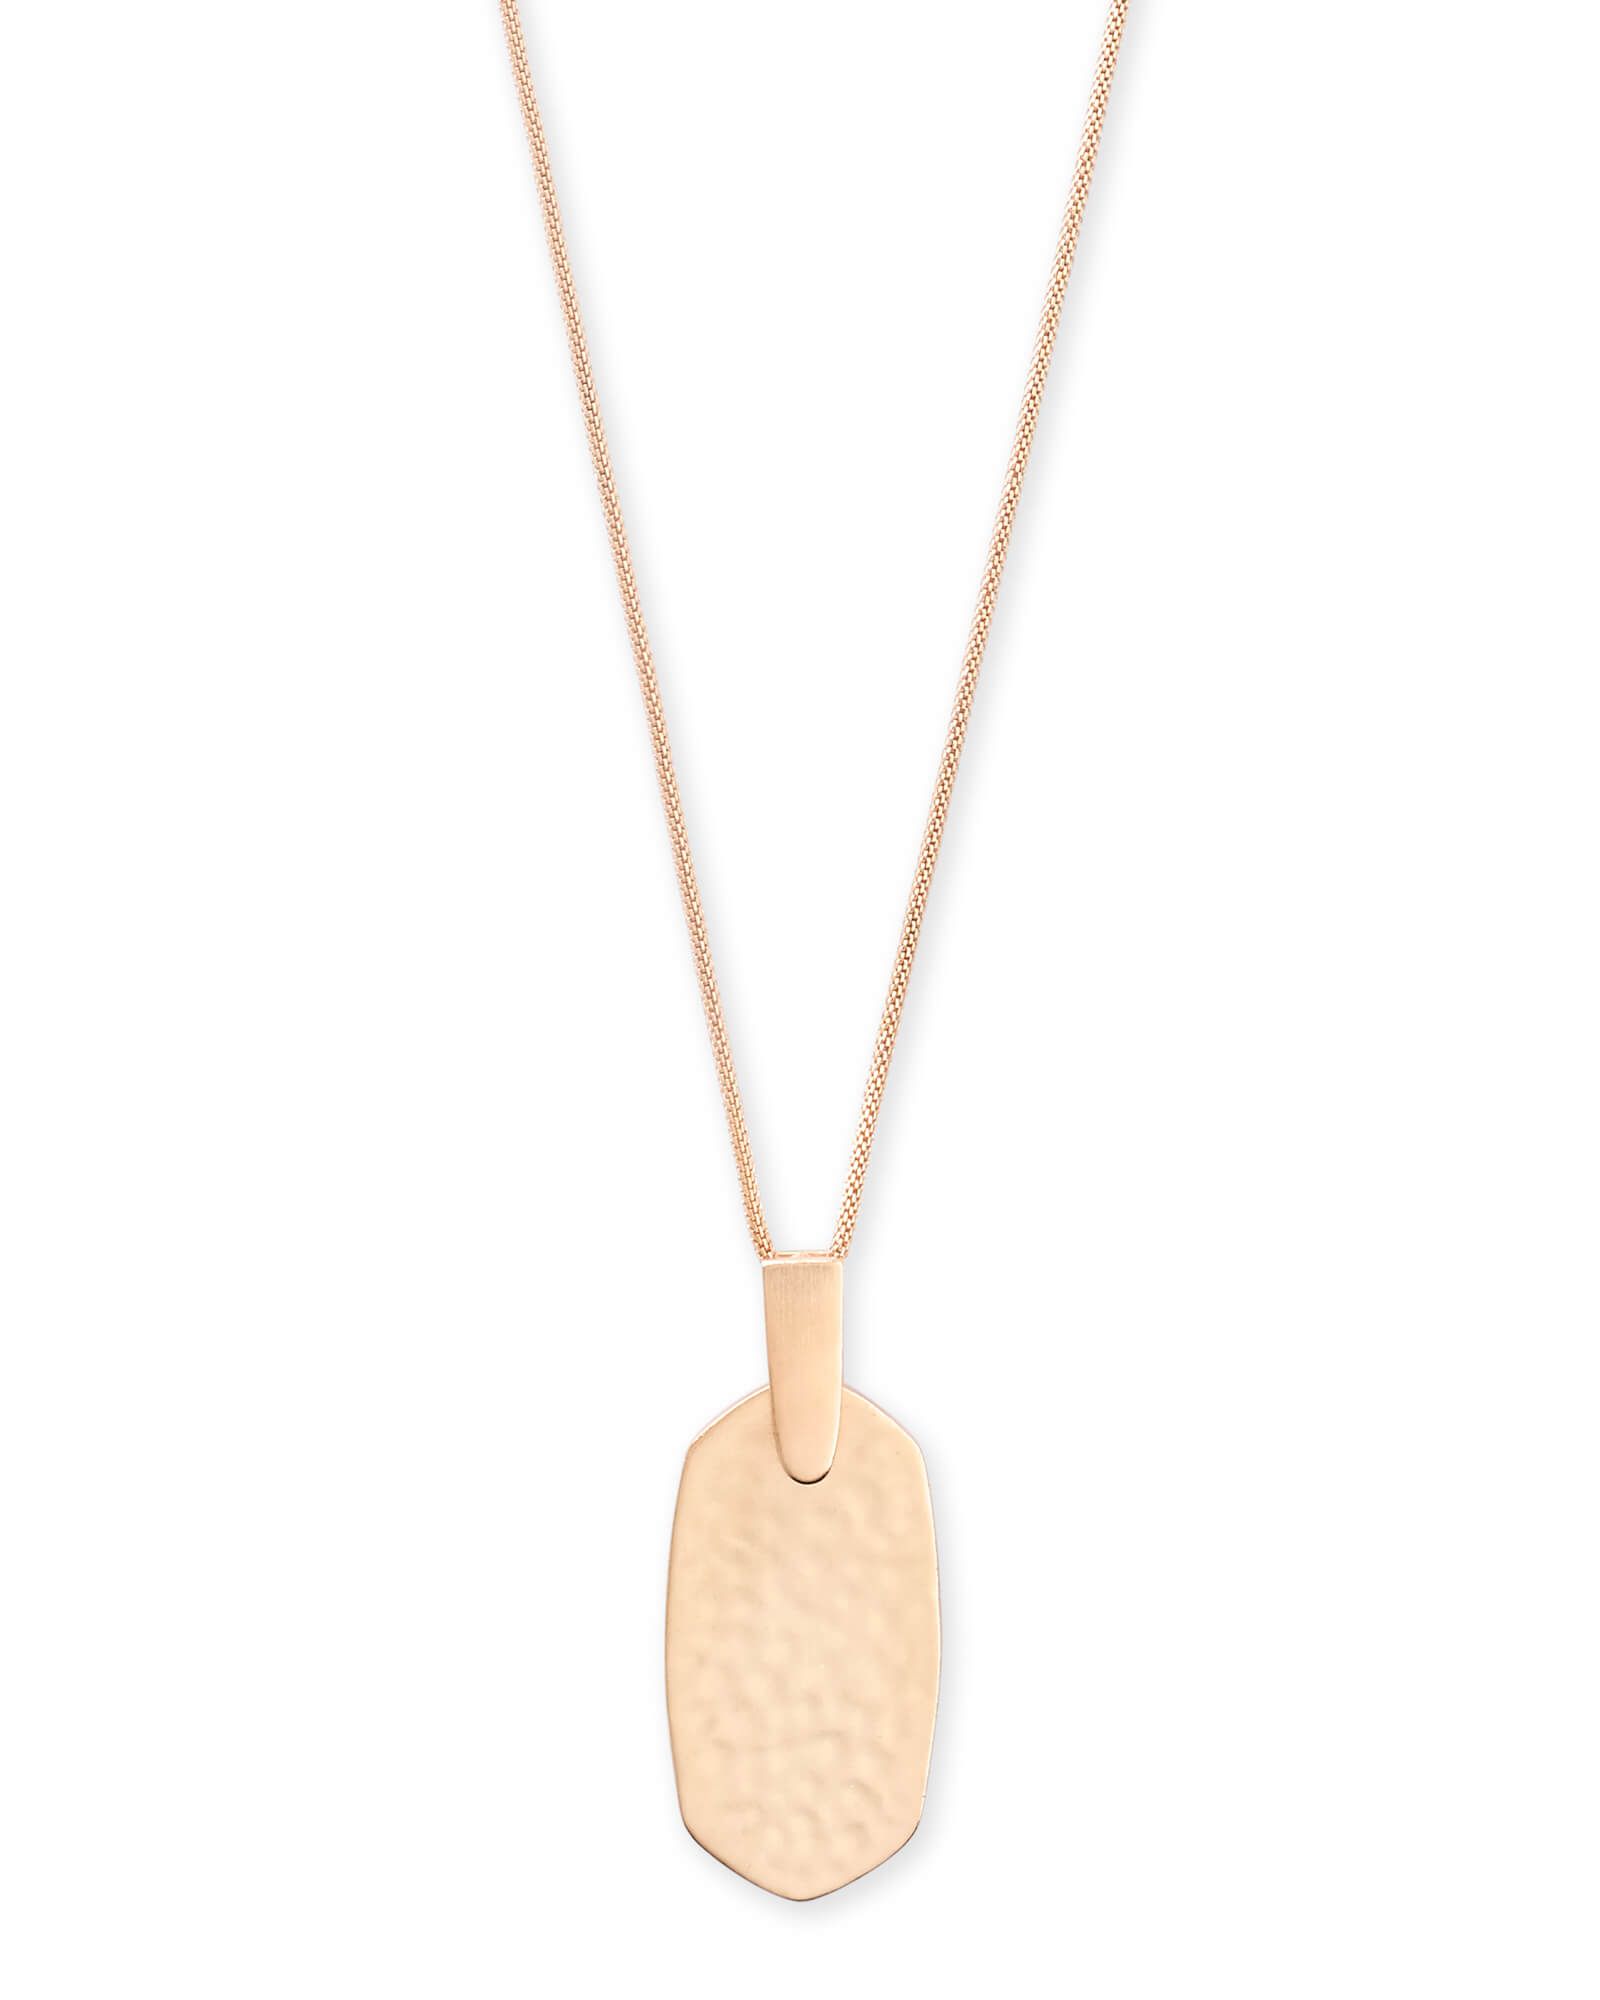 Inez Hammered Long Pendant Necklace in Rose Gold | Kendra Scott